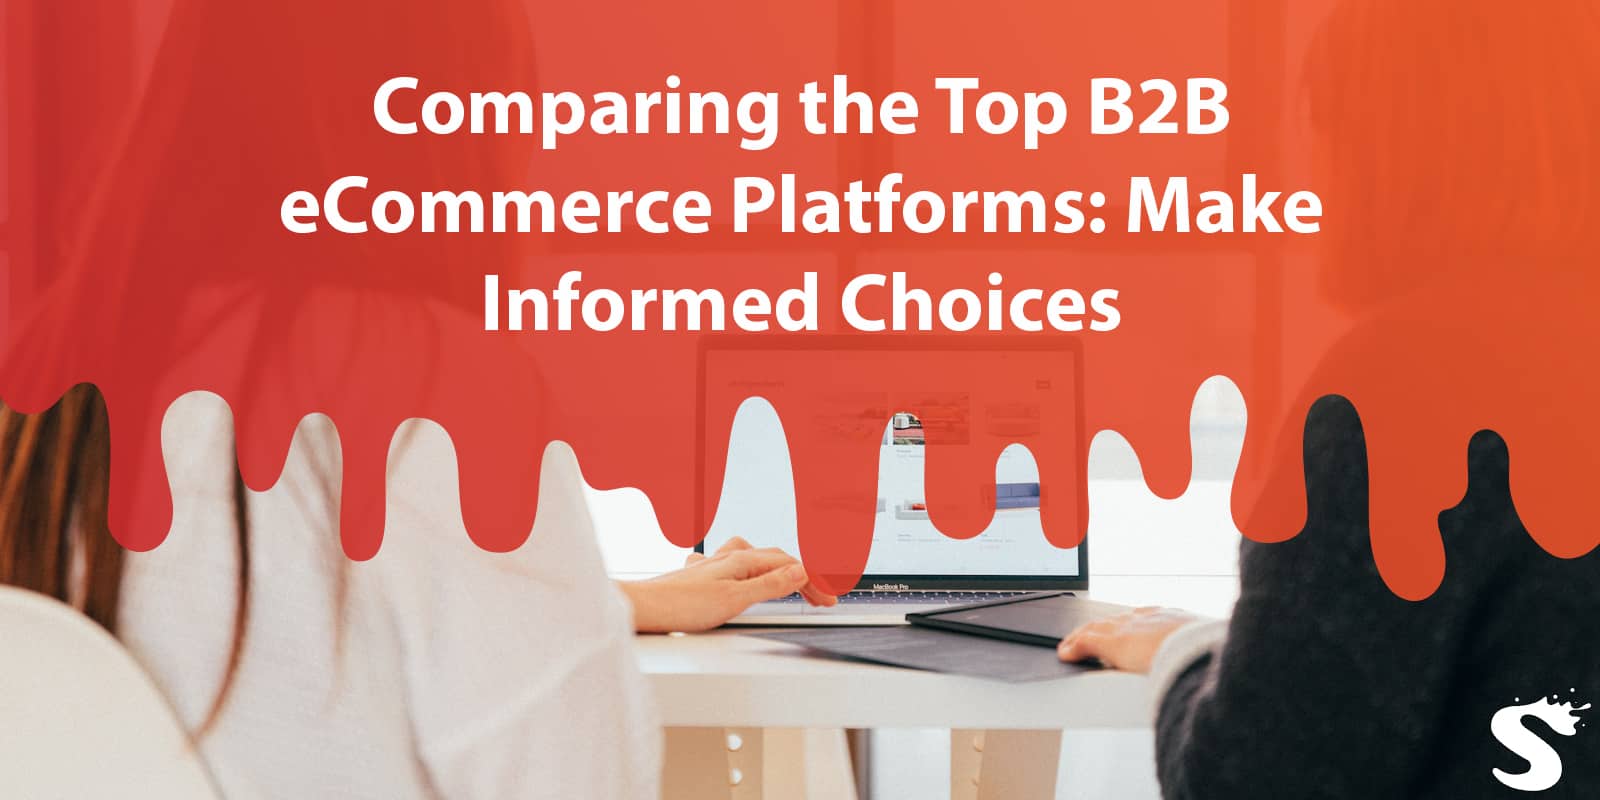 Comparing the Top B2B eCommerce Platforms: Make Informed Choices